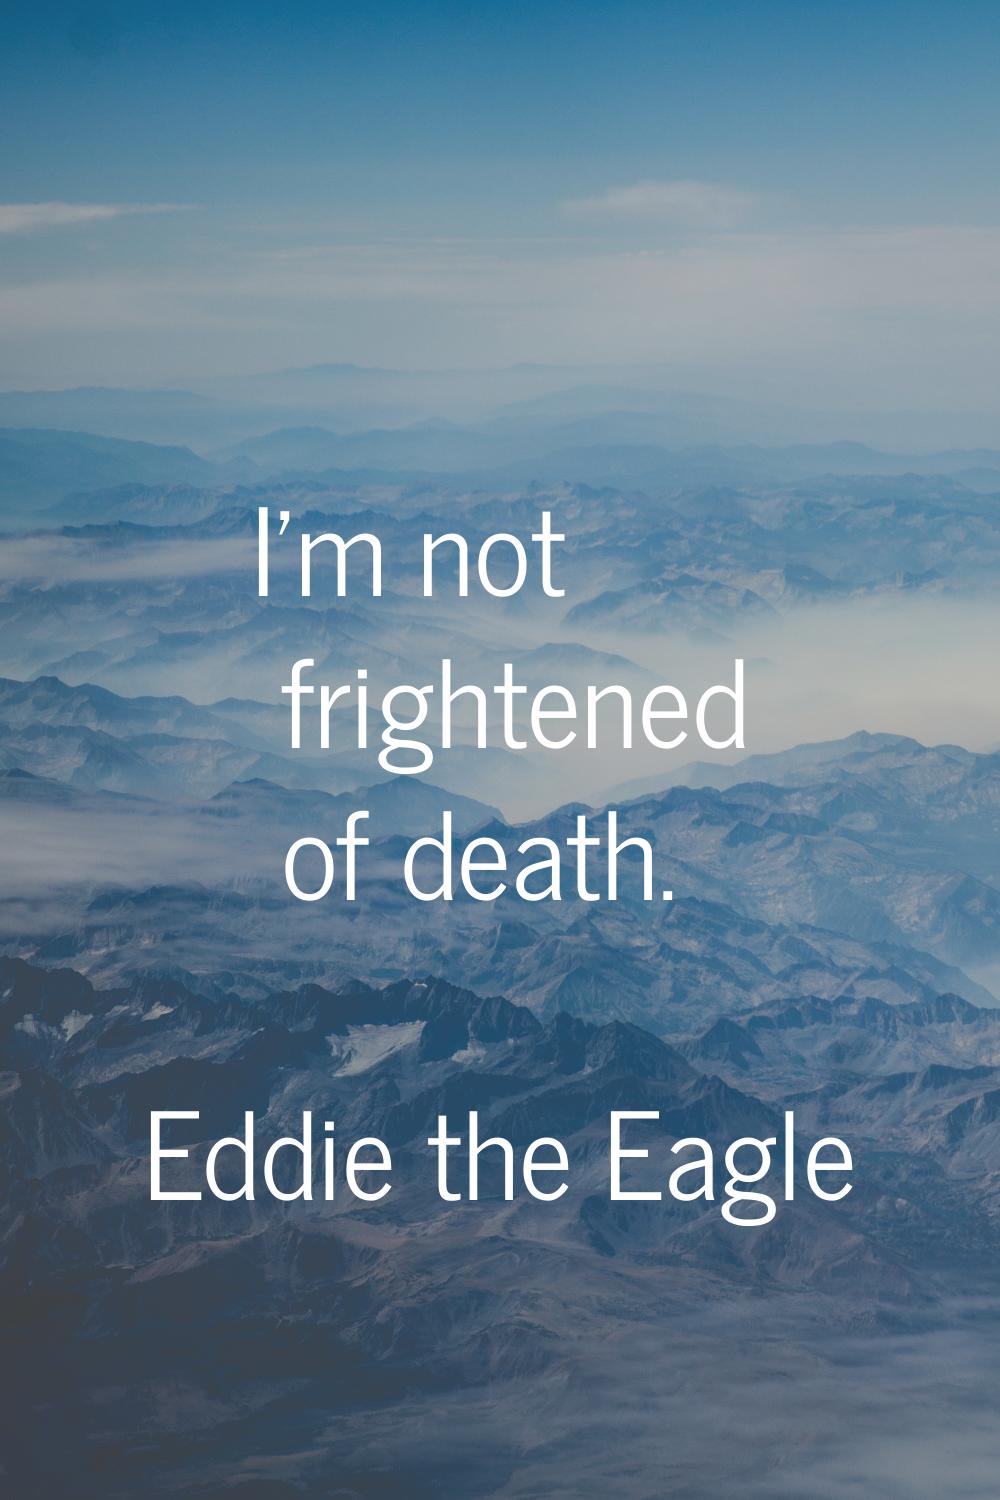 I'm not frightened of death.